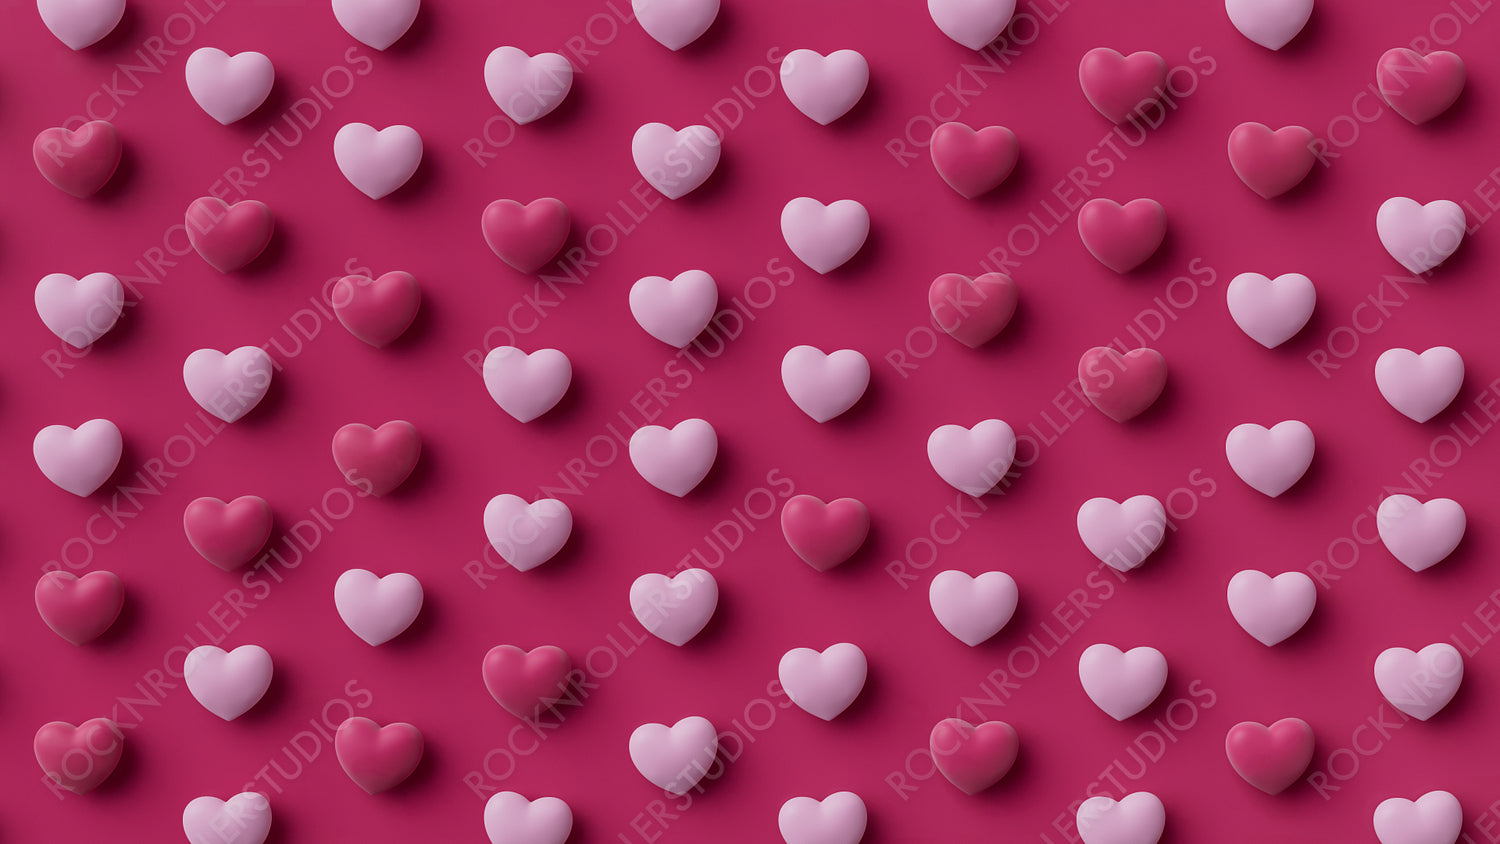 Multicolored Heart background. Valentine Wallpaper with Light Pink and Dark Pink love hearts. 3D Render 